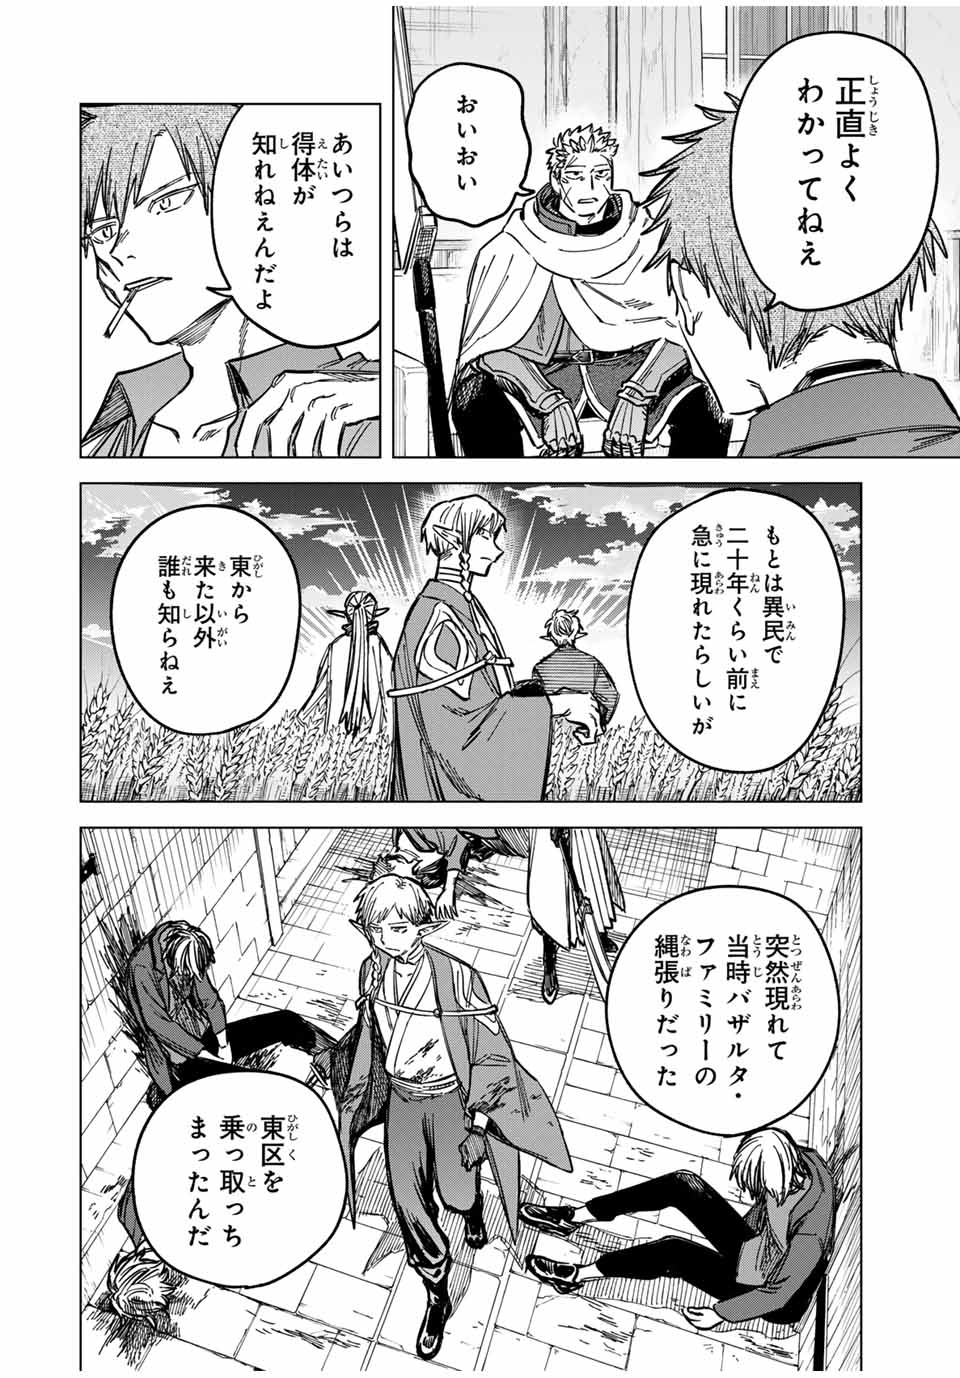 Witch and Mercenary 魔女と傭兵 第11話 - Page 6